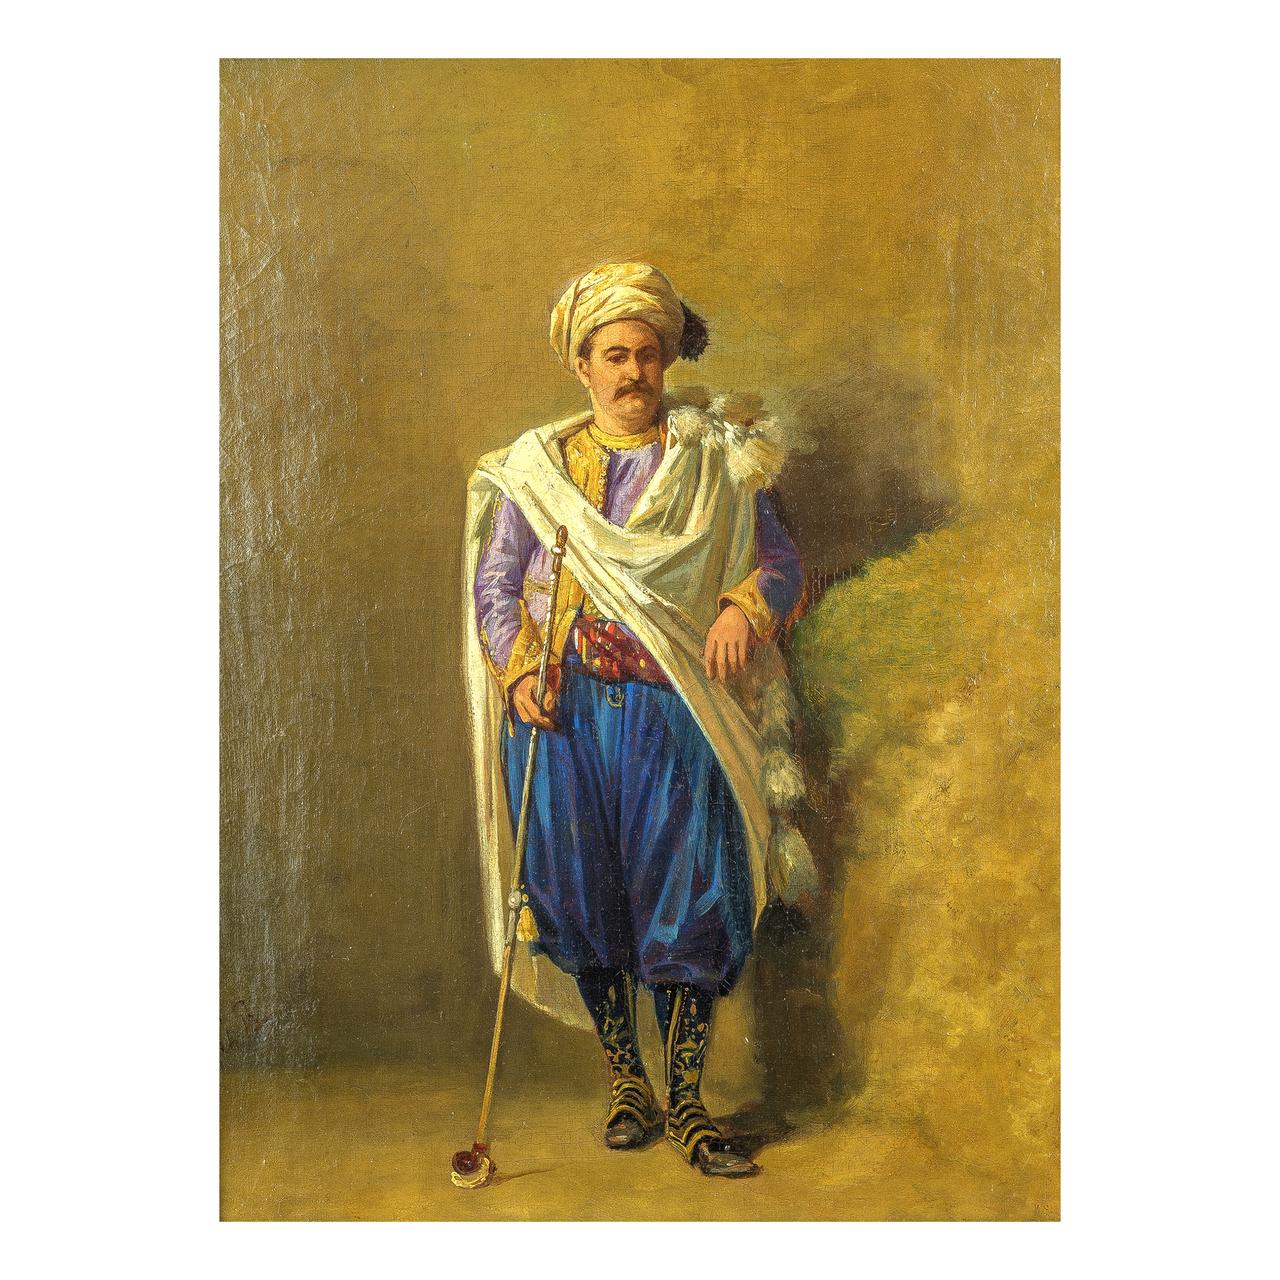 Ottoman Holding a Tophane Pipe - Painting by Louis Charles Bombled